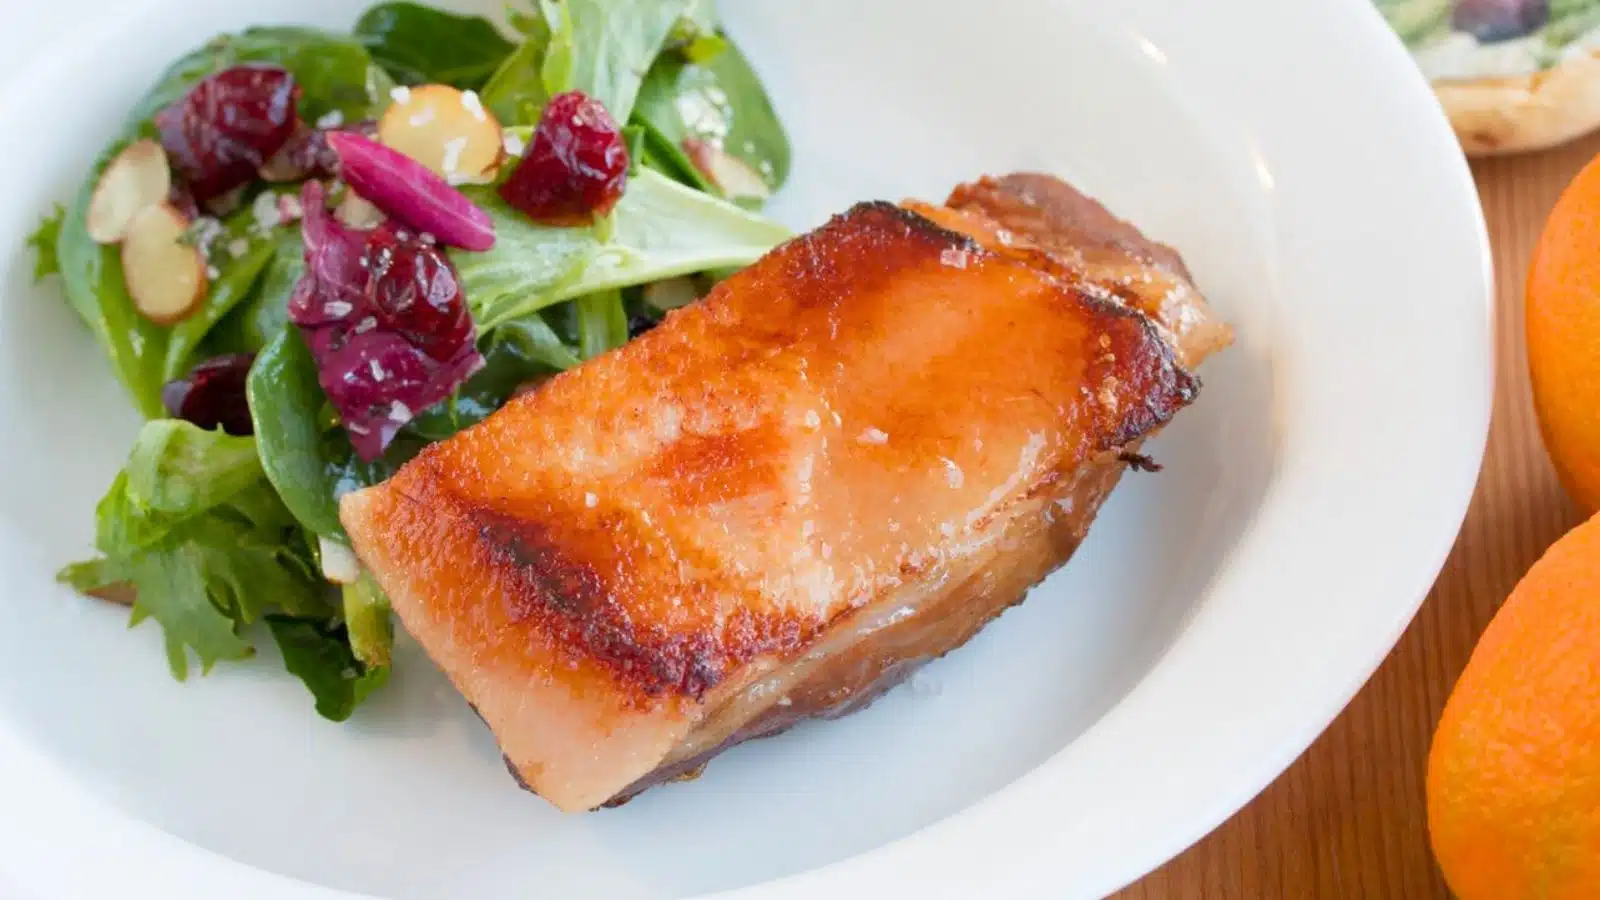 pork belly with a sauce on a white plate with a salad